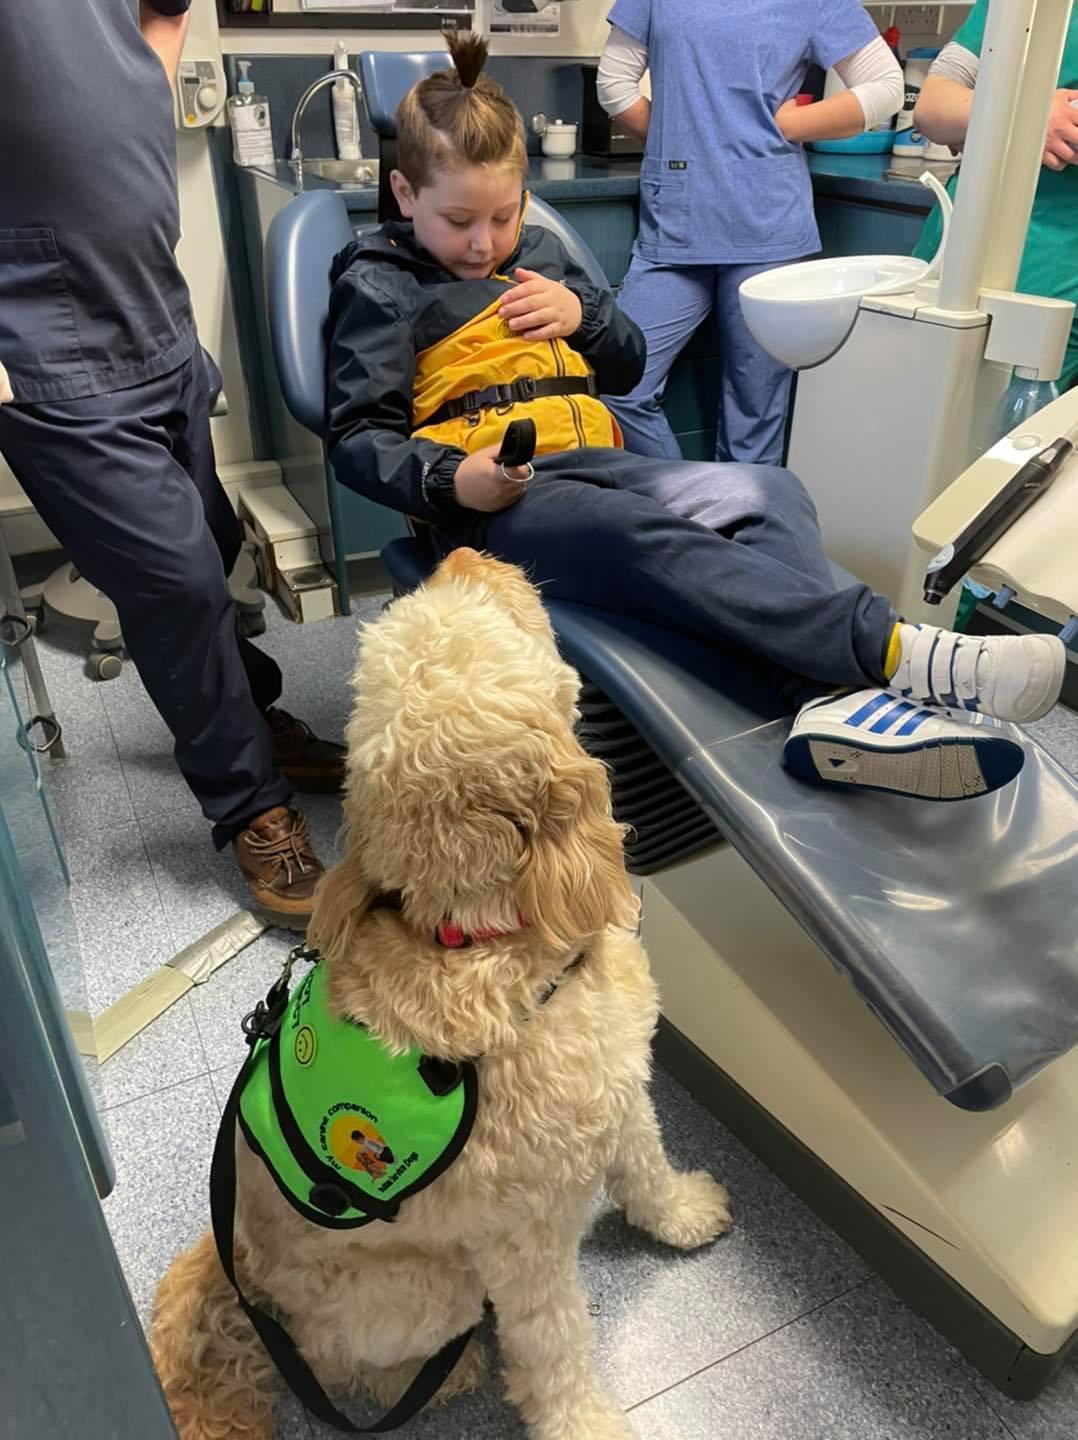 Riley, 7, with his autism service dog, Willow, during his first visit to the dentist on May 28. (Courtesy of <a href="https://www.facebook.com/myboyblue2017/">Nicole Duggan</a>)